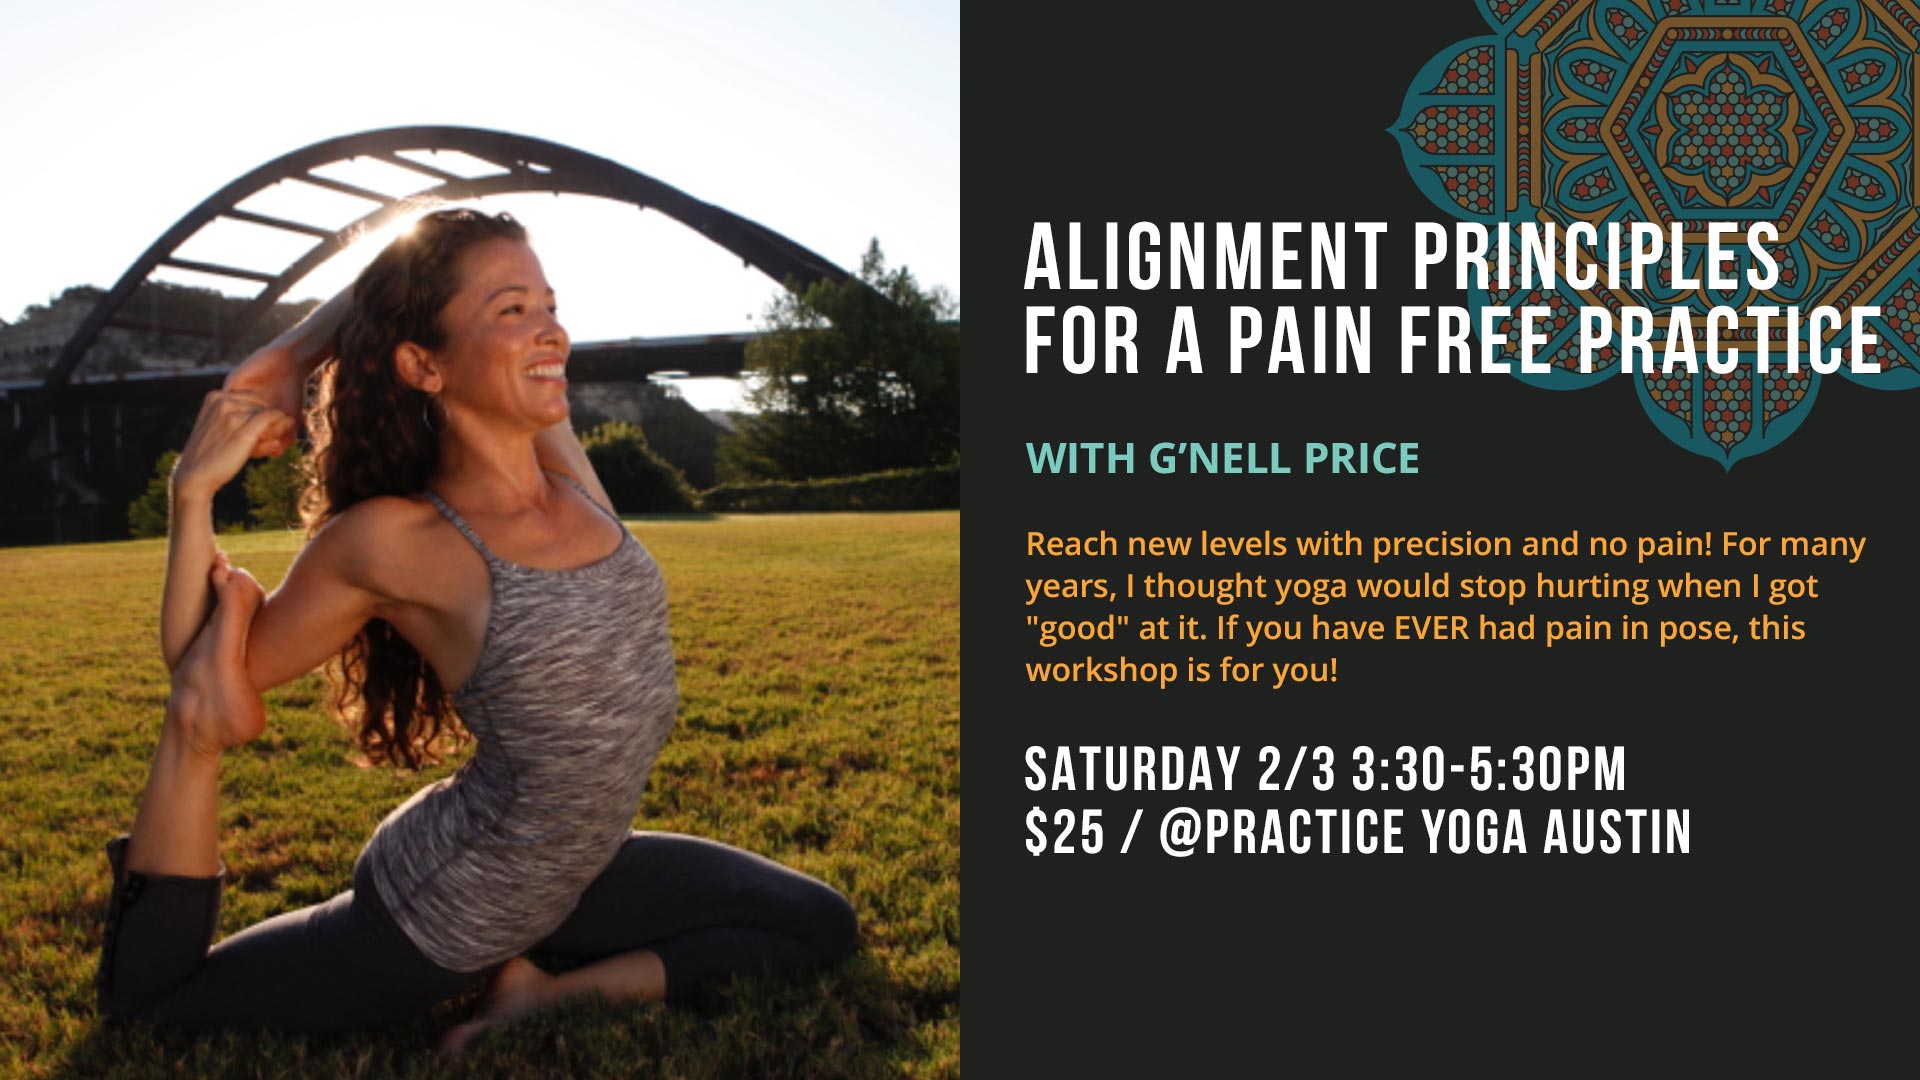 Pain free practice workshop with G'Nell Price